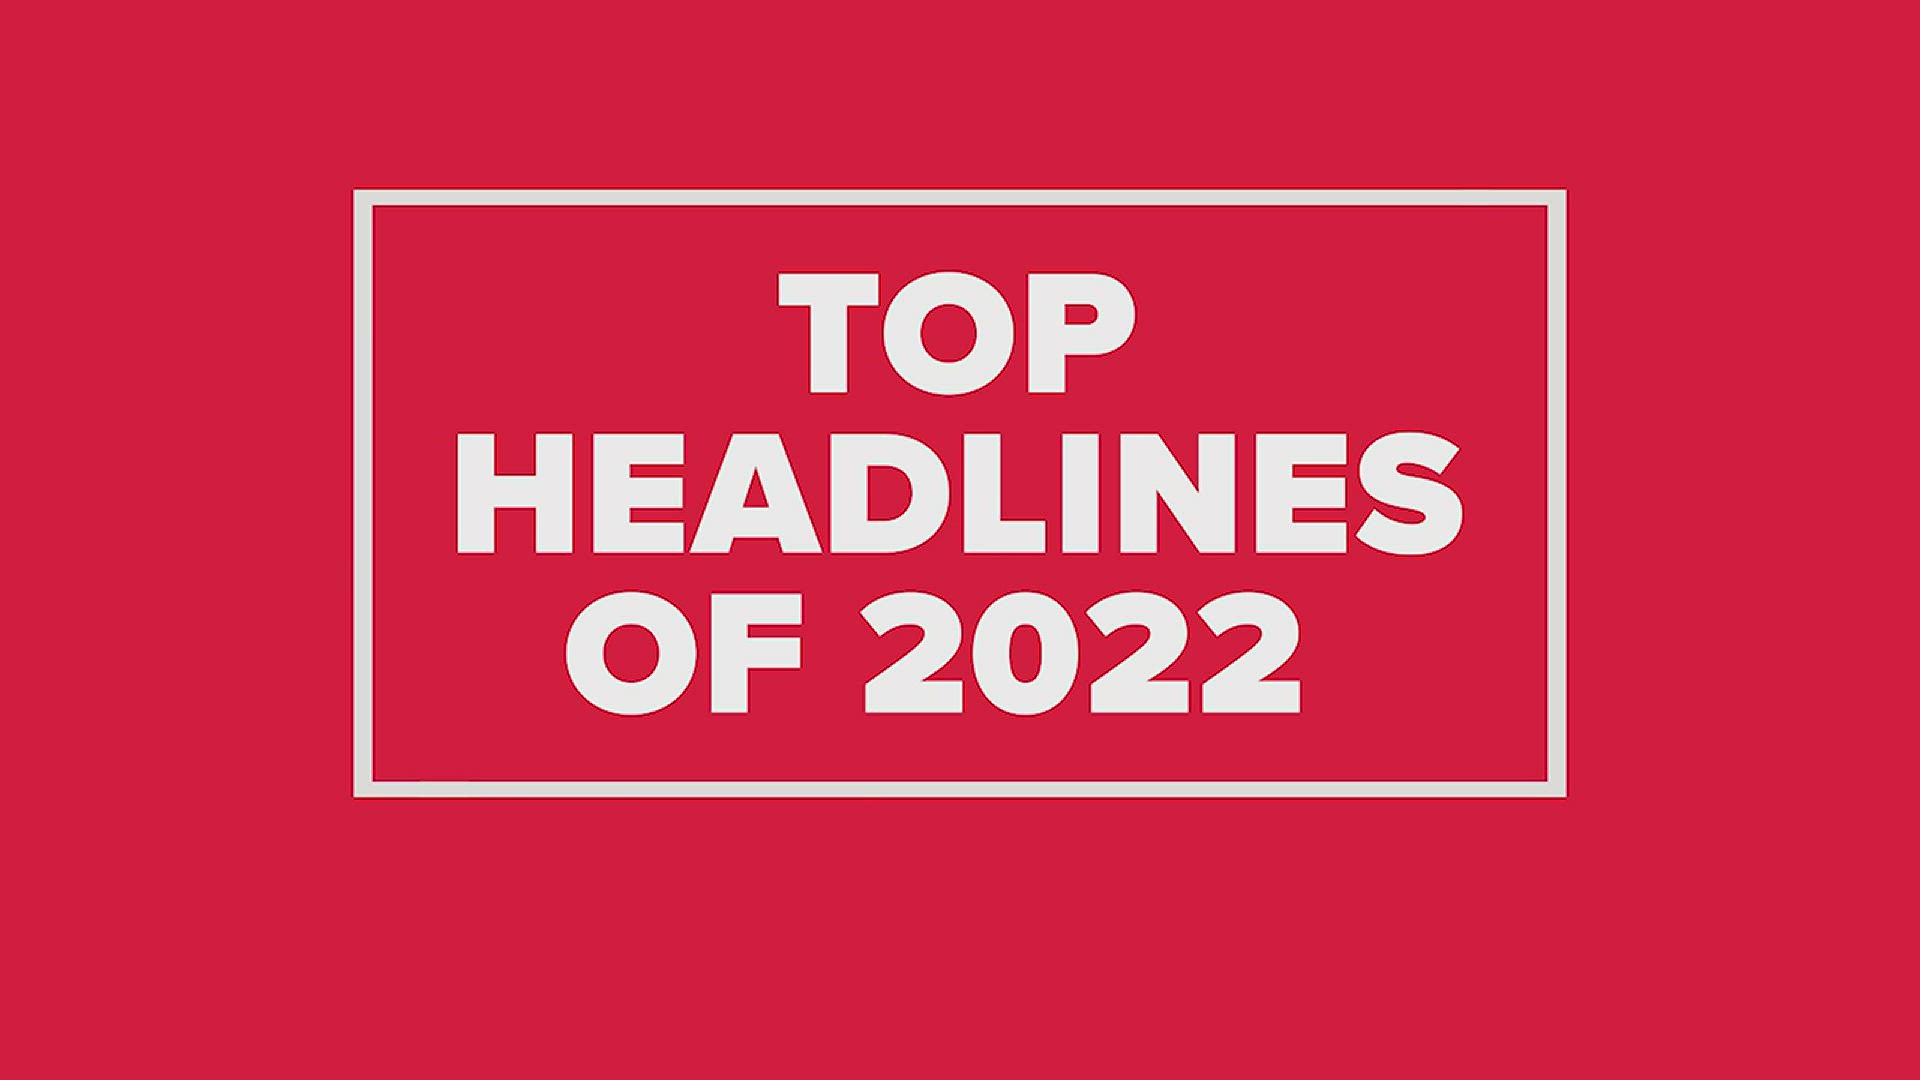 Here are some of top headlines in metro Atlanta news for 2022.